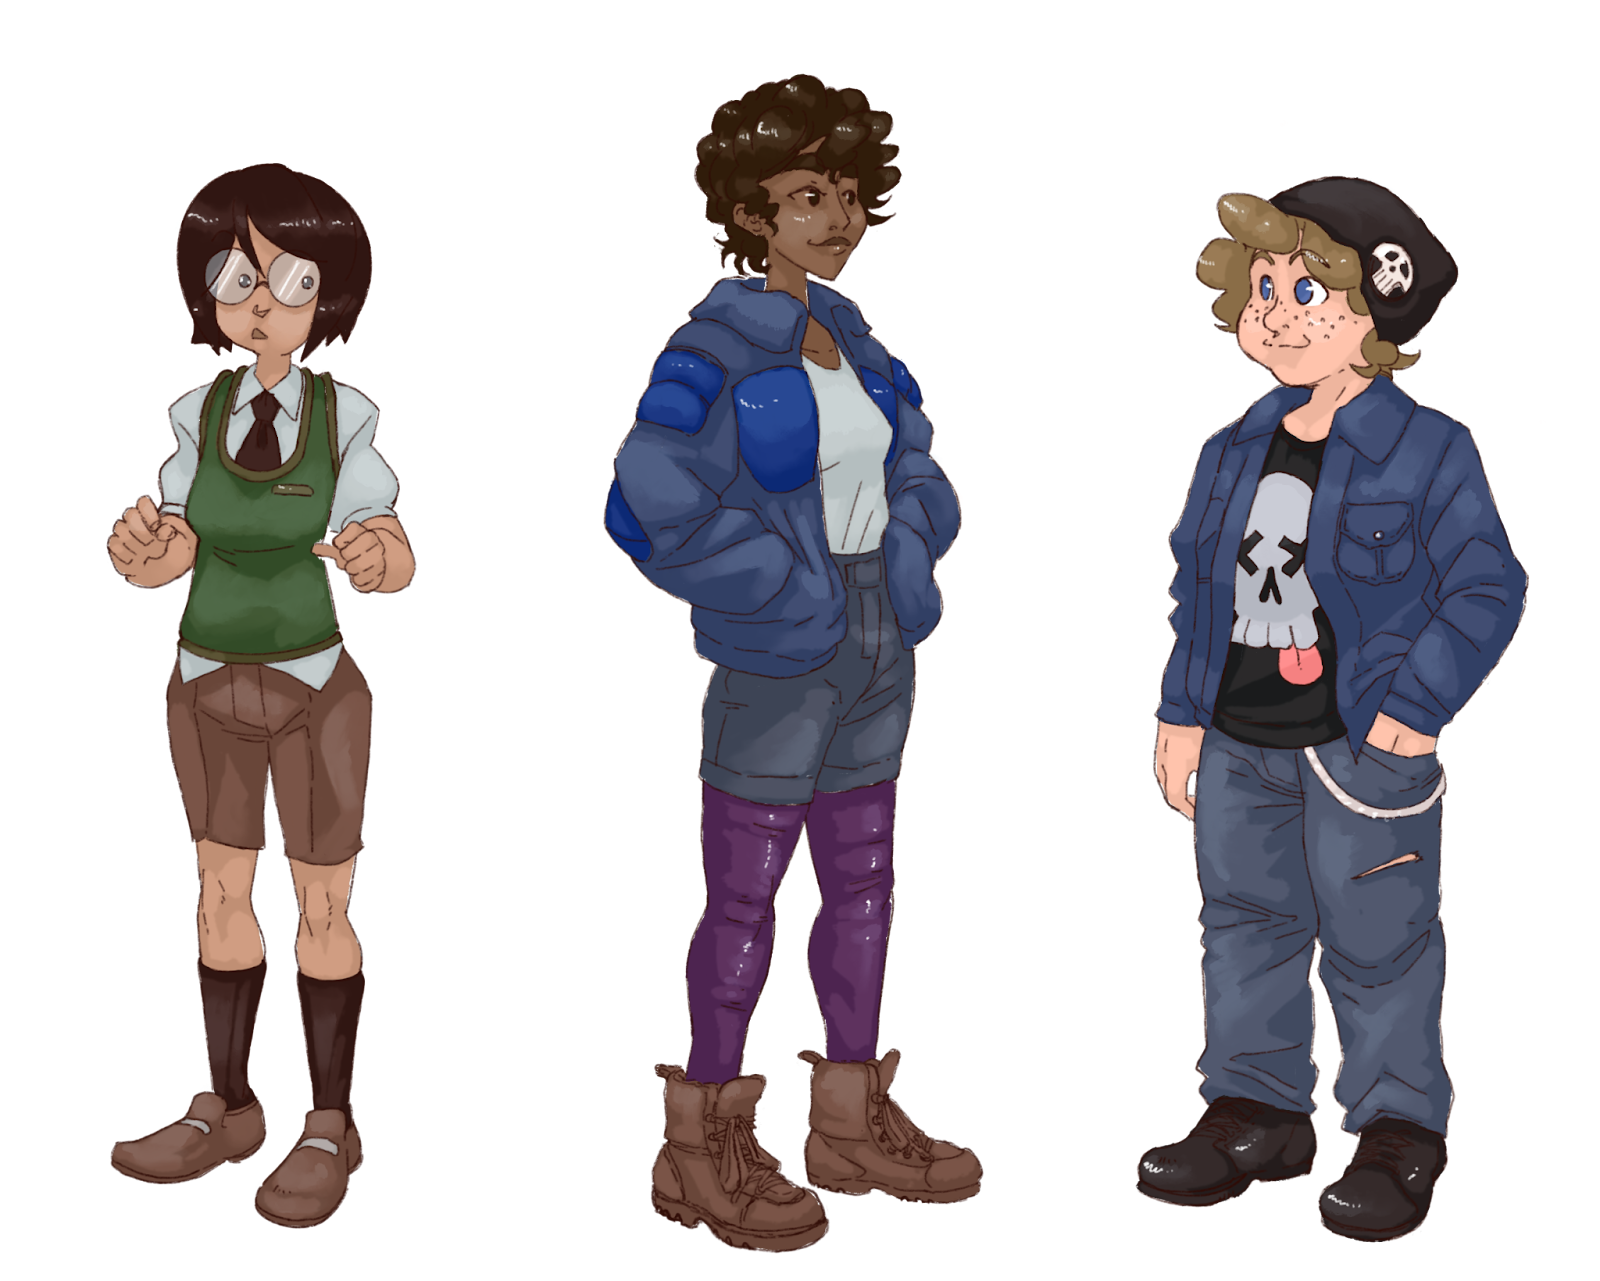 Three children. The first is a young girl with wide glasses and a spacey expression and short, dark hair. The second is the tallest, with a puffy jacket, curly brown hair, and dark skin and eyes. The last is the shortest, with pale skin, freckles, and a vaguely punk aesthetic.